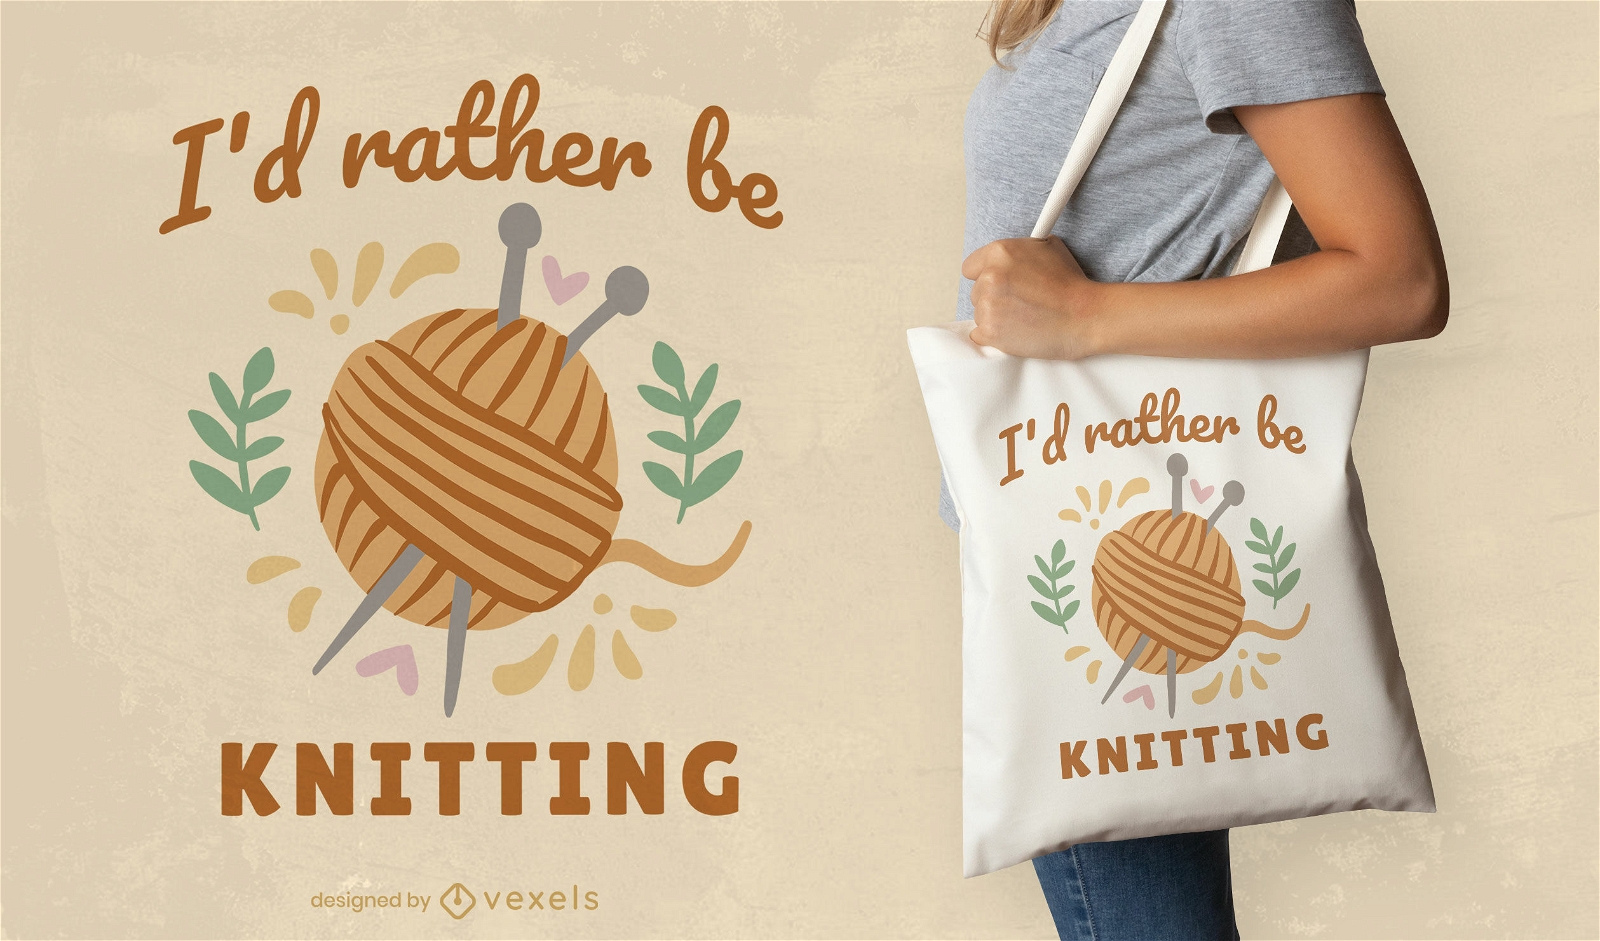 Knitting Hobby Needles And Wool Tote Bag Design Vector Download